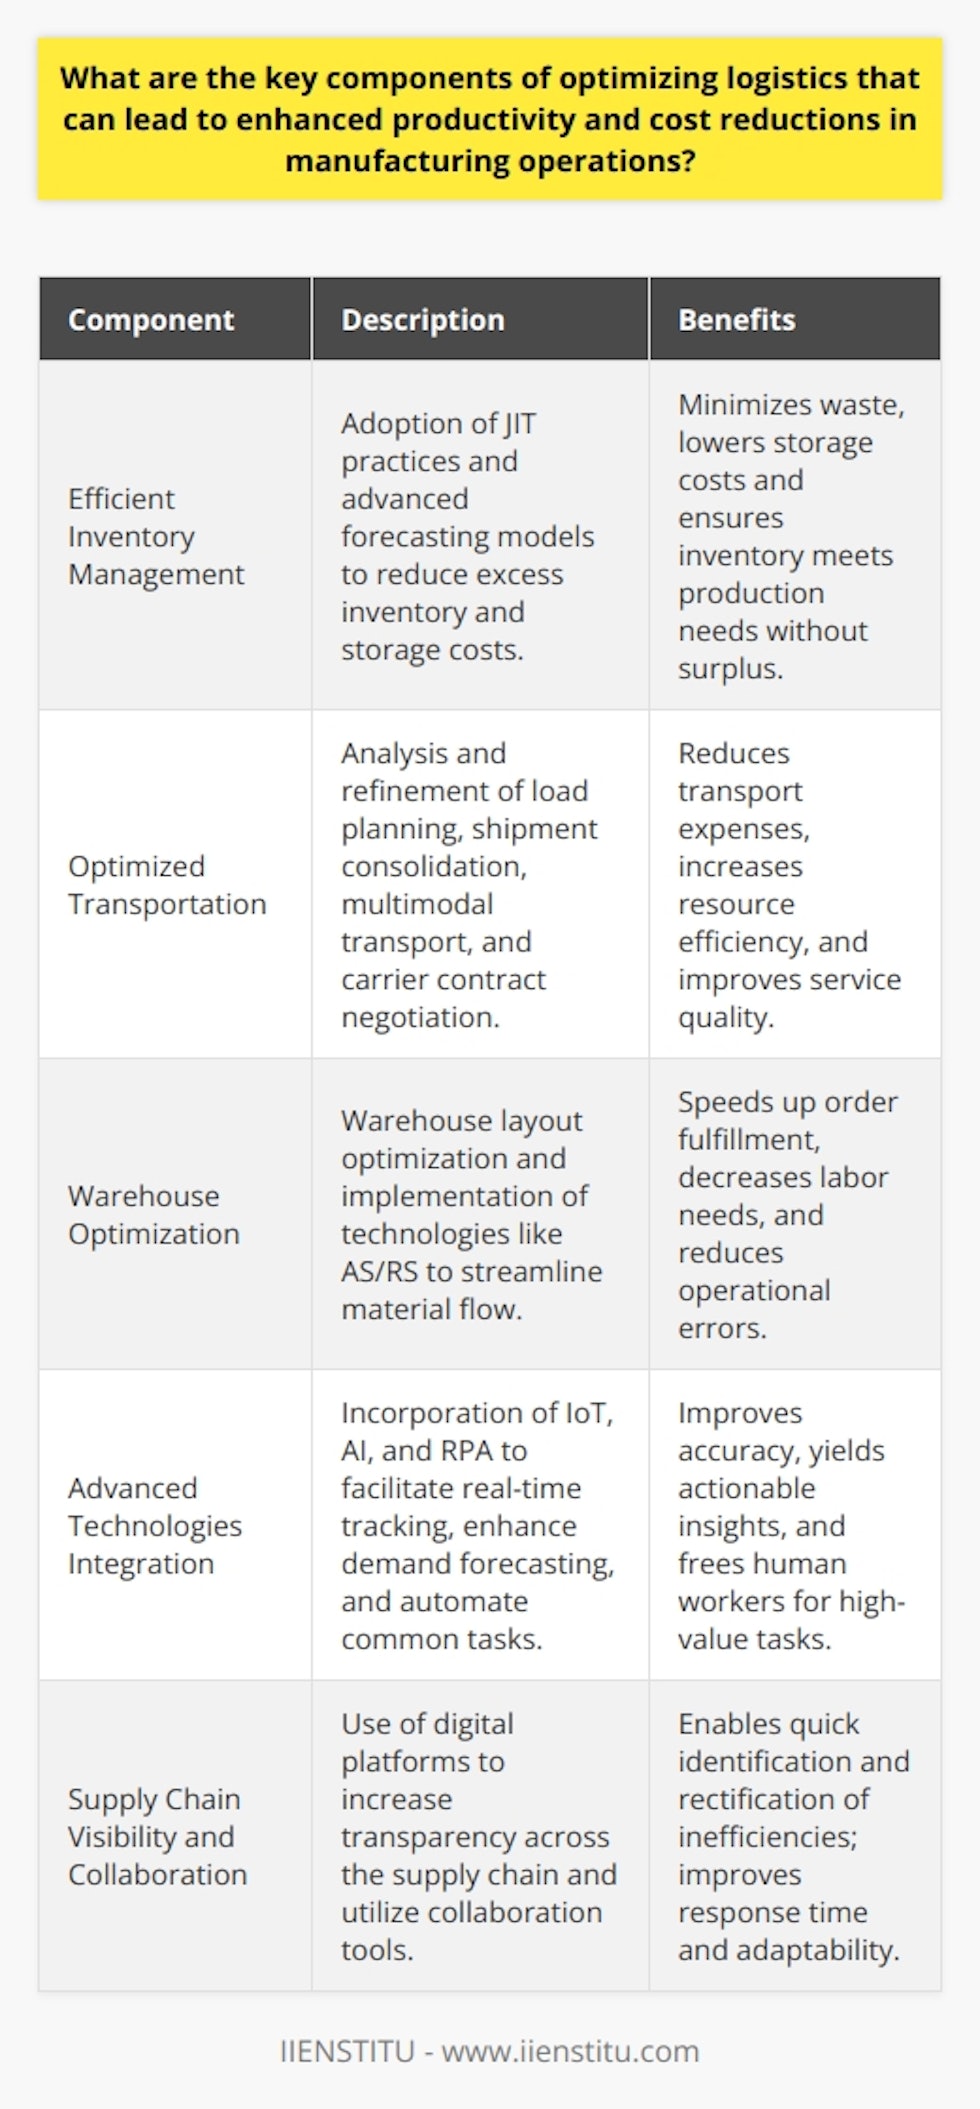 Optimizing logistics within manufacturing operations is a multifaceted endeavor that hinges on several critical components. These components work collaboratively to ensure enhanced productivity and significant cost reductions. By understanding and implementing strategies in each of these areas, manufacturers can develop a robust logistics framework capable of responding to current demands and future growth.**Efficient Inventory Management**Effective inventory control is the bedrock of a well-functioning manufacturing operation. By adopting just-in-time (JIT) inventory practices, manufacturers can maintain leaner inventory levels, thus minimizing storage costs and reducing waste due to obsolete or unsold stock. At the same time, advanced forecasting models enable the anticipation of demand variances, ensuring adequate inventory is available to meet production schedules without excess.**Optimized Transportation**Refining the transportation component entails an in-depth analysis of both inbound and outbound logistics. Optimizing load planning, consolidating shipments, and leveraging multimodal transport solutions can all lead to more efficient use of resources and cost savings. Furthermore, negotiating more favorable contracts with carriers and evaluating their performance are essential to reducing transport expenses and enhancing service quality.**Warehouse Optimization**A well-organized warehouse significantly augments manufacturing operation efficiency. Layout optimization—arranging warehouses to minimize movement and streamline the flow of materials—can expedite order fulfillment and reduce errors. Similarly, implementing technologies such as automated storage and retrieval systems (AS/RS) can accelerate processes and decrease labor requirements, boosting overall productivity.**Advanced Technologies Integration**There is a transformative power in integrating advanced technologies into logistics operations. The deployment of IoT devices offers real-time tracking of assets, improving the accuracy of inventory management. Through AI, manufacturers gain insights from large data sets, leading to more precise demand forecasting and resource allocation. Similarly, RPA can automate repetitive tasks, such as order processing, liberating human workers to focus on more complex, high-value activities.**Supply Chain Visibility and Collaboration**In a complex manufacturing ecosystem, visibility throughout the supply chain is indispensable. Digital platforms can interconnect various segments of the supply chain, affording a panoramic view of operations from raw materials to final delivery. This transparency enables quick identification of inefficiencies and fosters a culture of continuous improvement. Collaboration tools further ensure alignment across the network, enhancing response times and adaptability in the face of disruptions.By adeptly managing inventory, finessing transportation strategies, intelligently designing warehouse operations, leveraging cutting-edge technologies, and fostering a transparent and collaborative supply chain, manufacturers can unlock new levels of logistics optimization. Each component synergistically contributes to creating a seamless operational flow that not only improves productivity but also slashes costs, ensuring a competitive stance in the market.